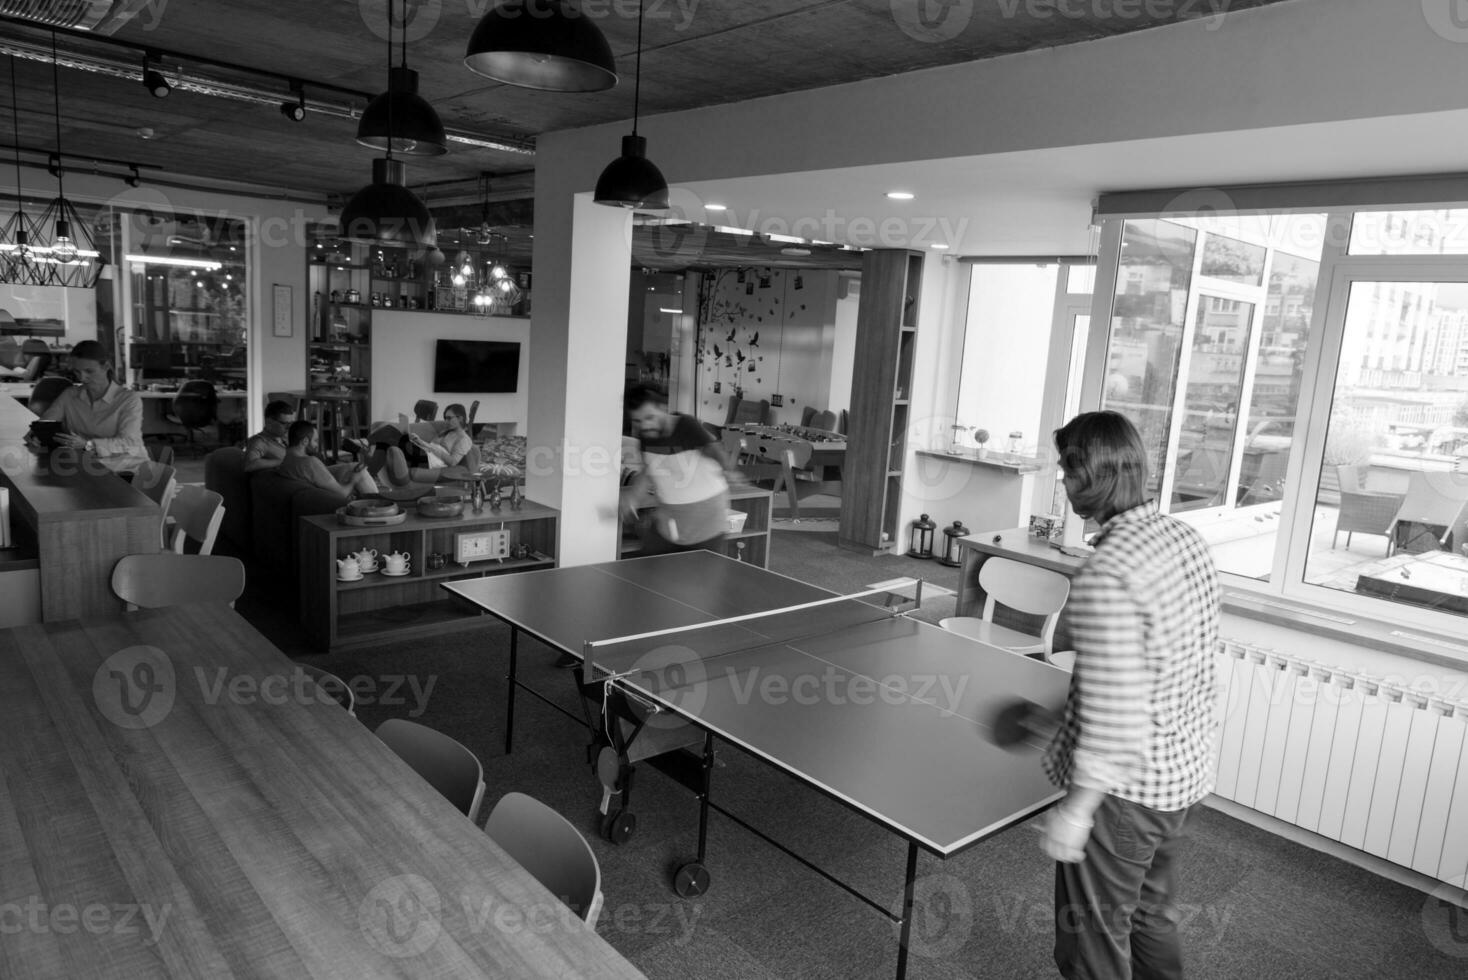 playing ping pong tennis at creative office space photo